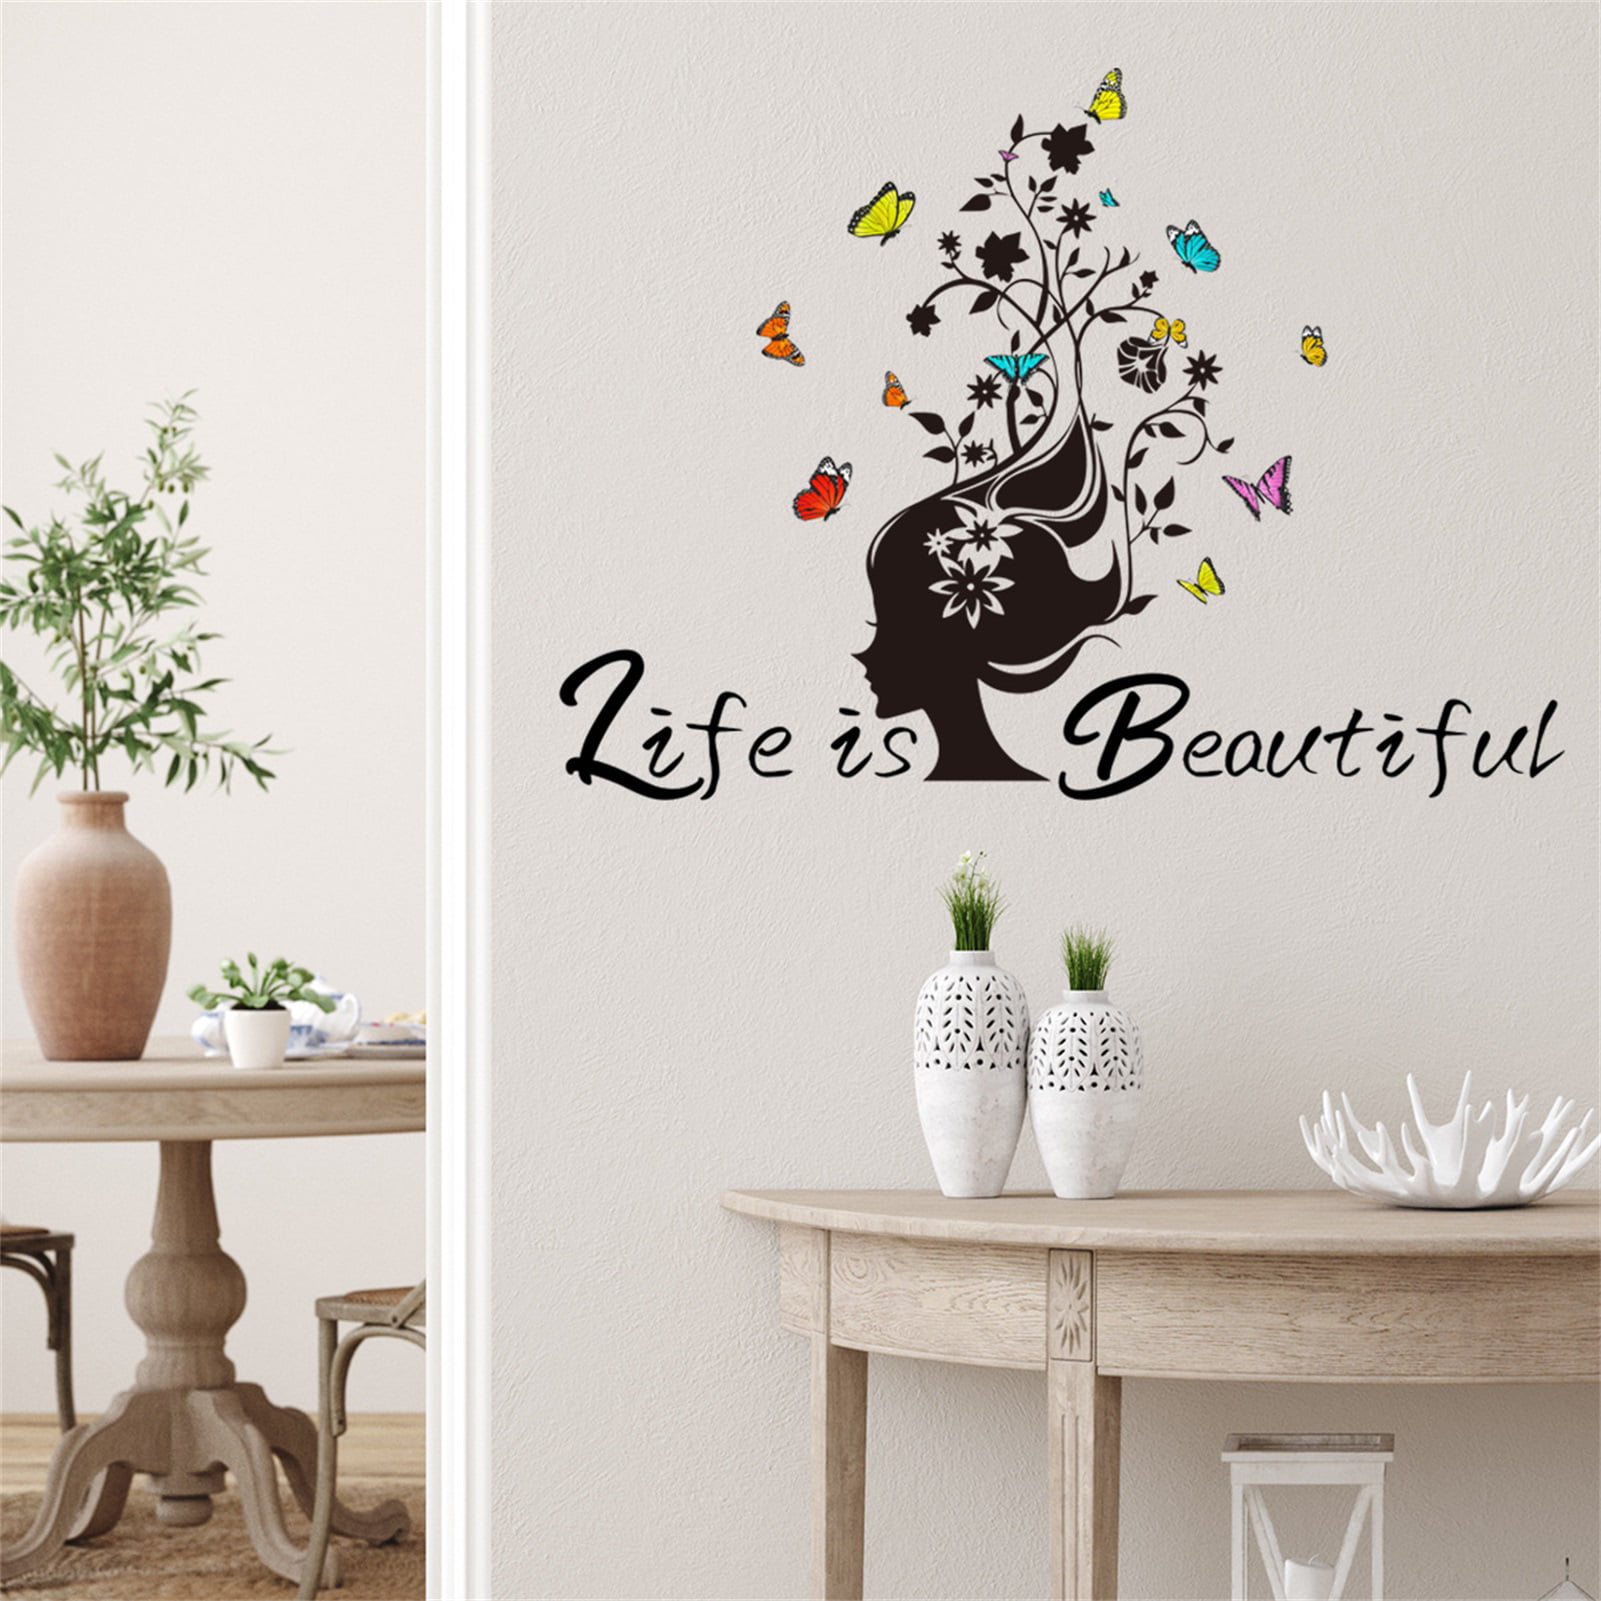 Life is Beautiful Wall Quotes™ Decal